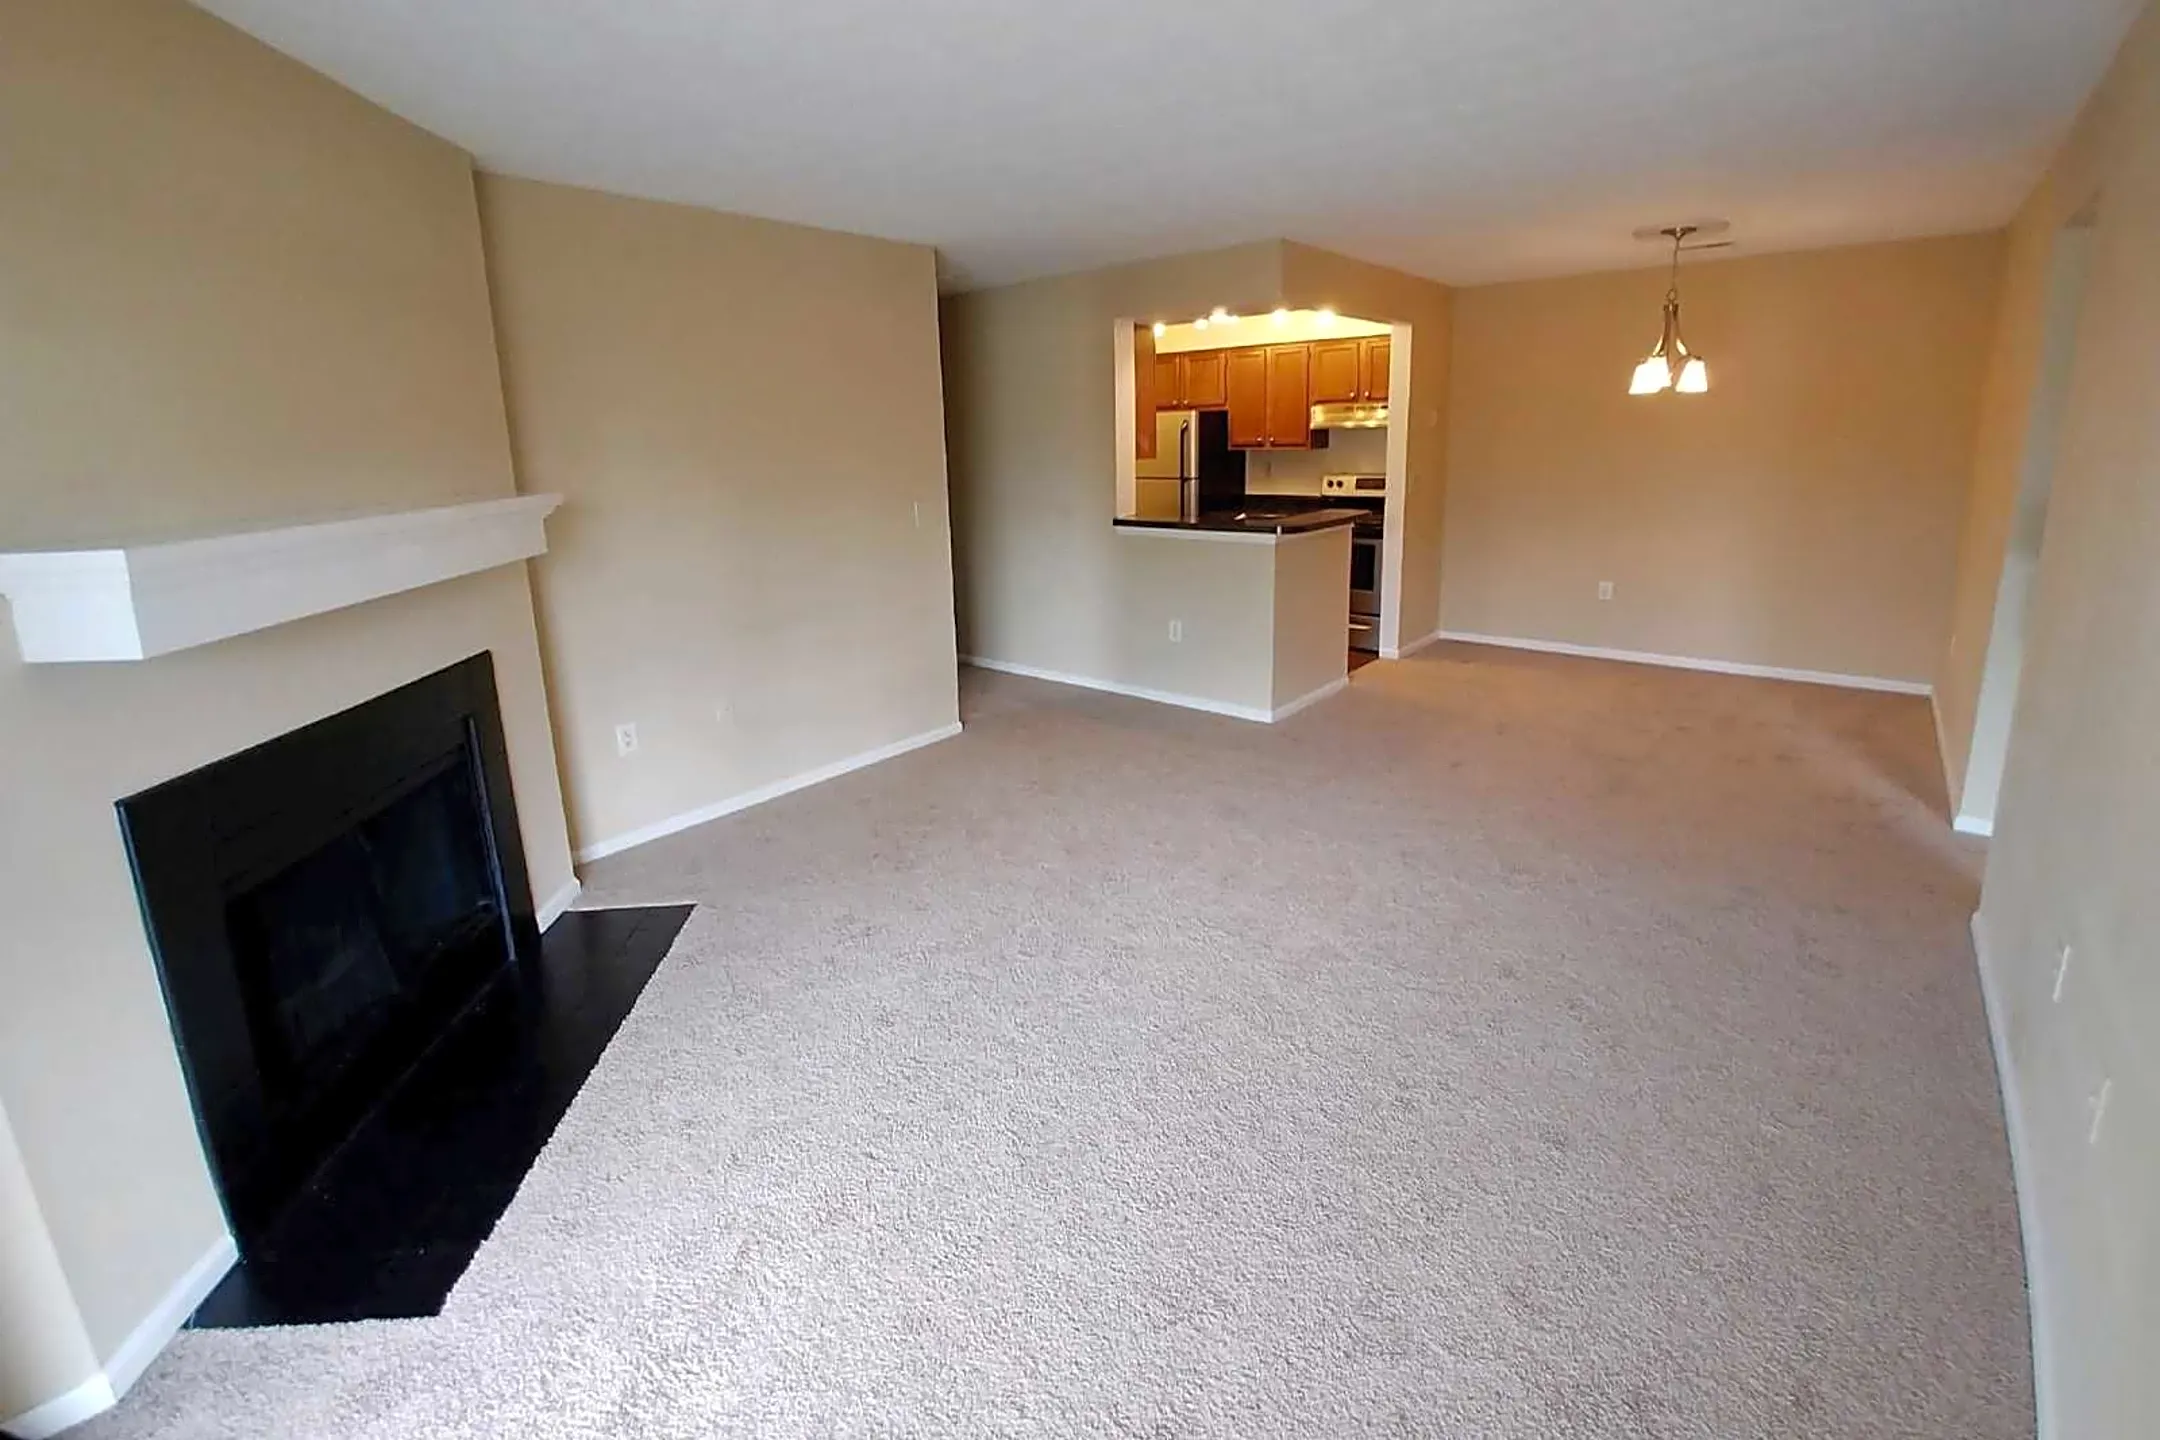 Living Room - Steeplechase Apartments - Centerville, OH